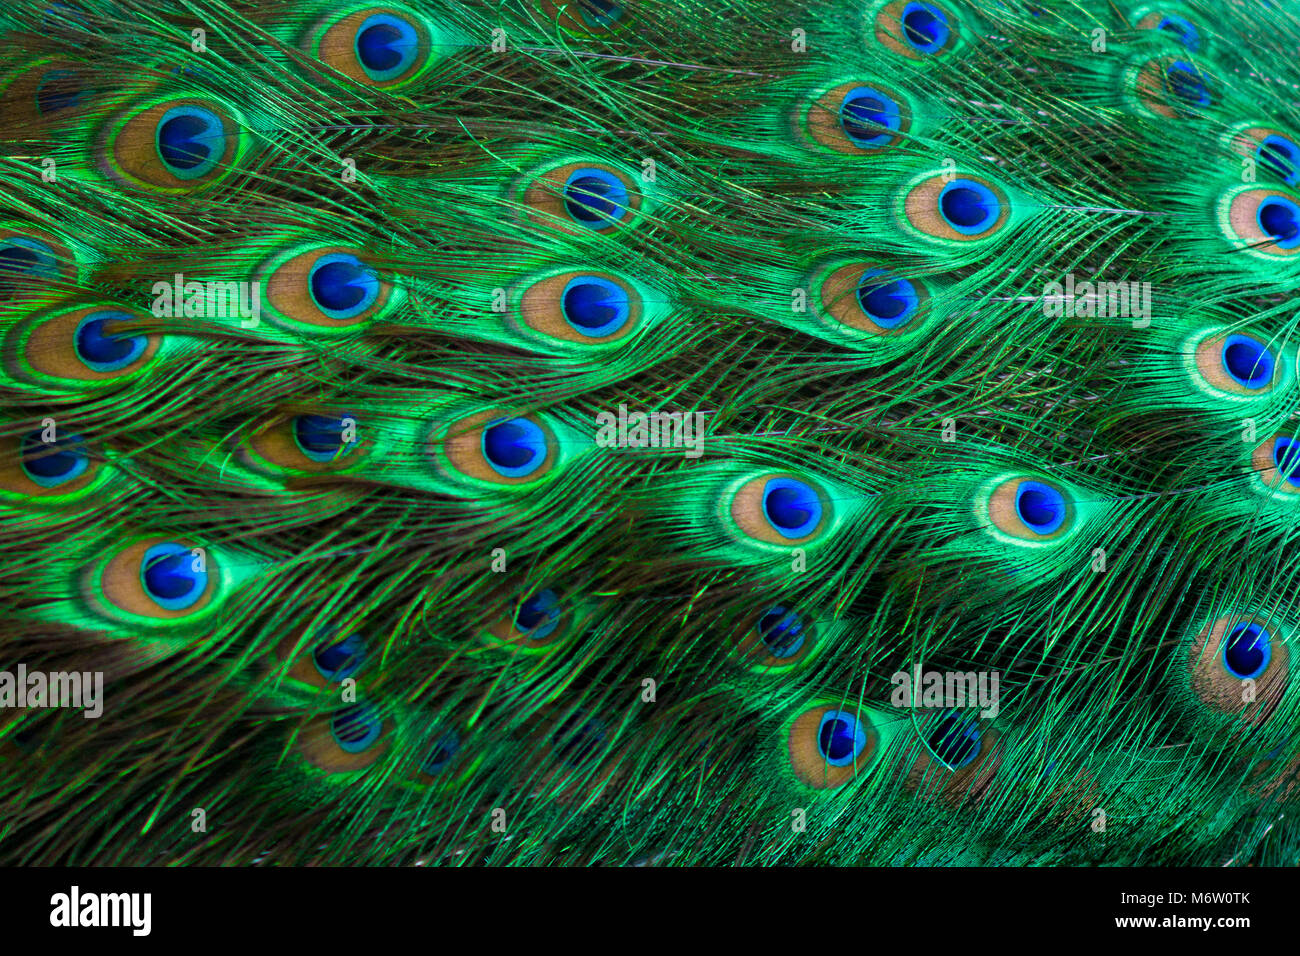 Peacock feathers Green Dot Pattern Blue Background Stock Photo